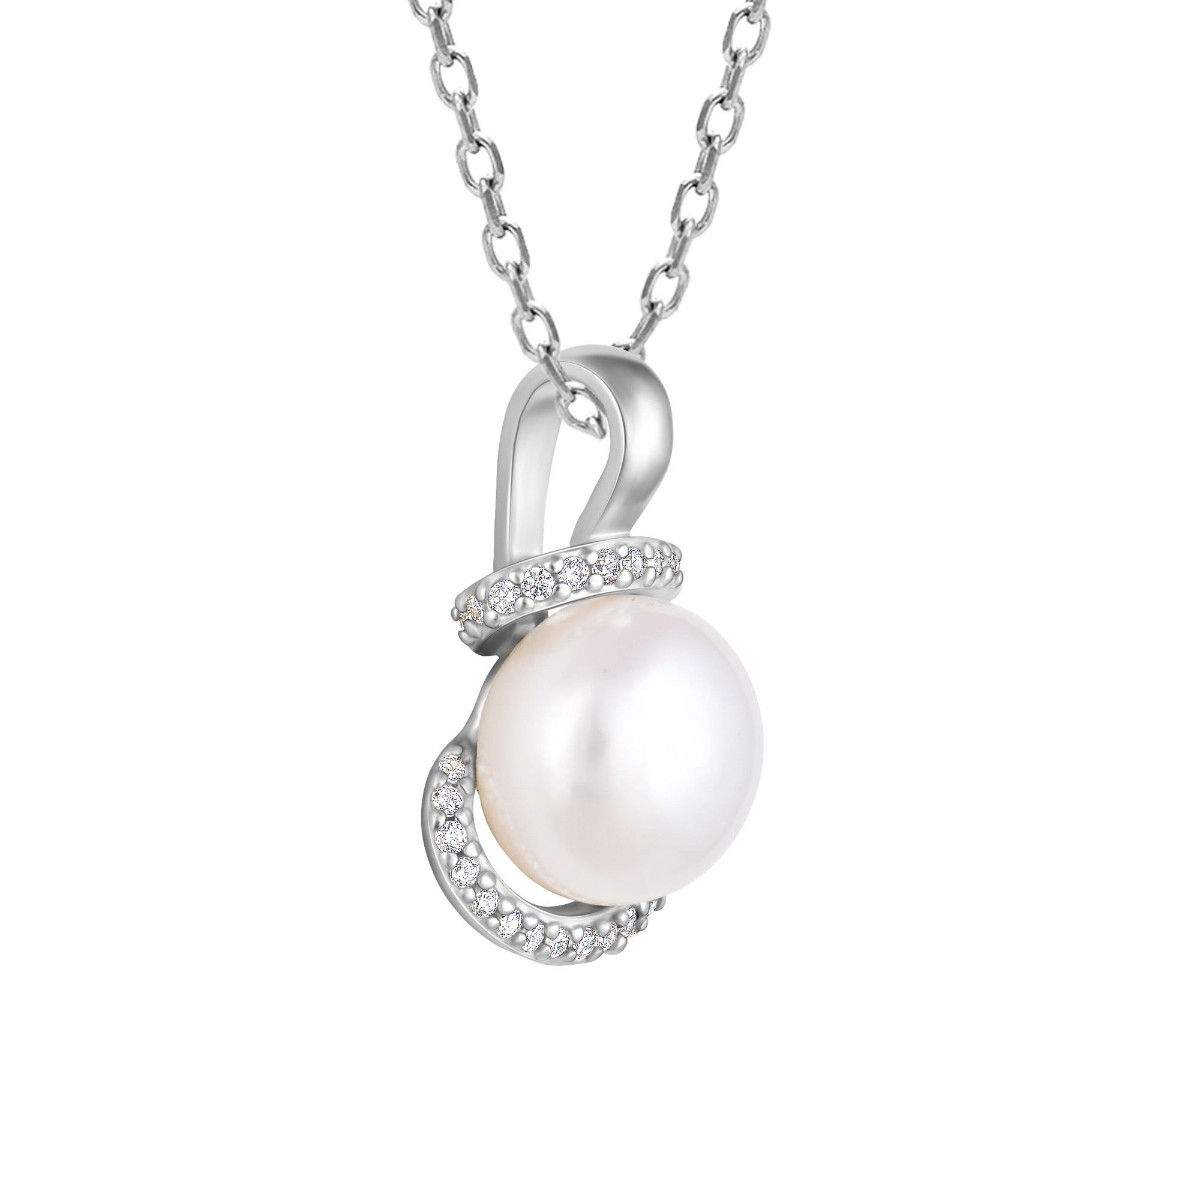 Buy GIVA 925 Sterling Silver Moon Pearl Pendant With Link Chain For ...